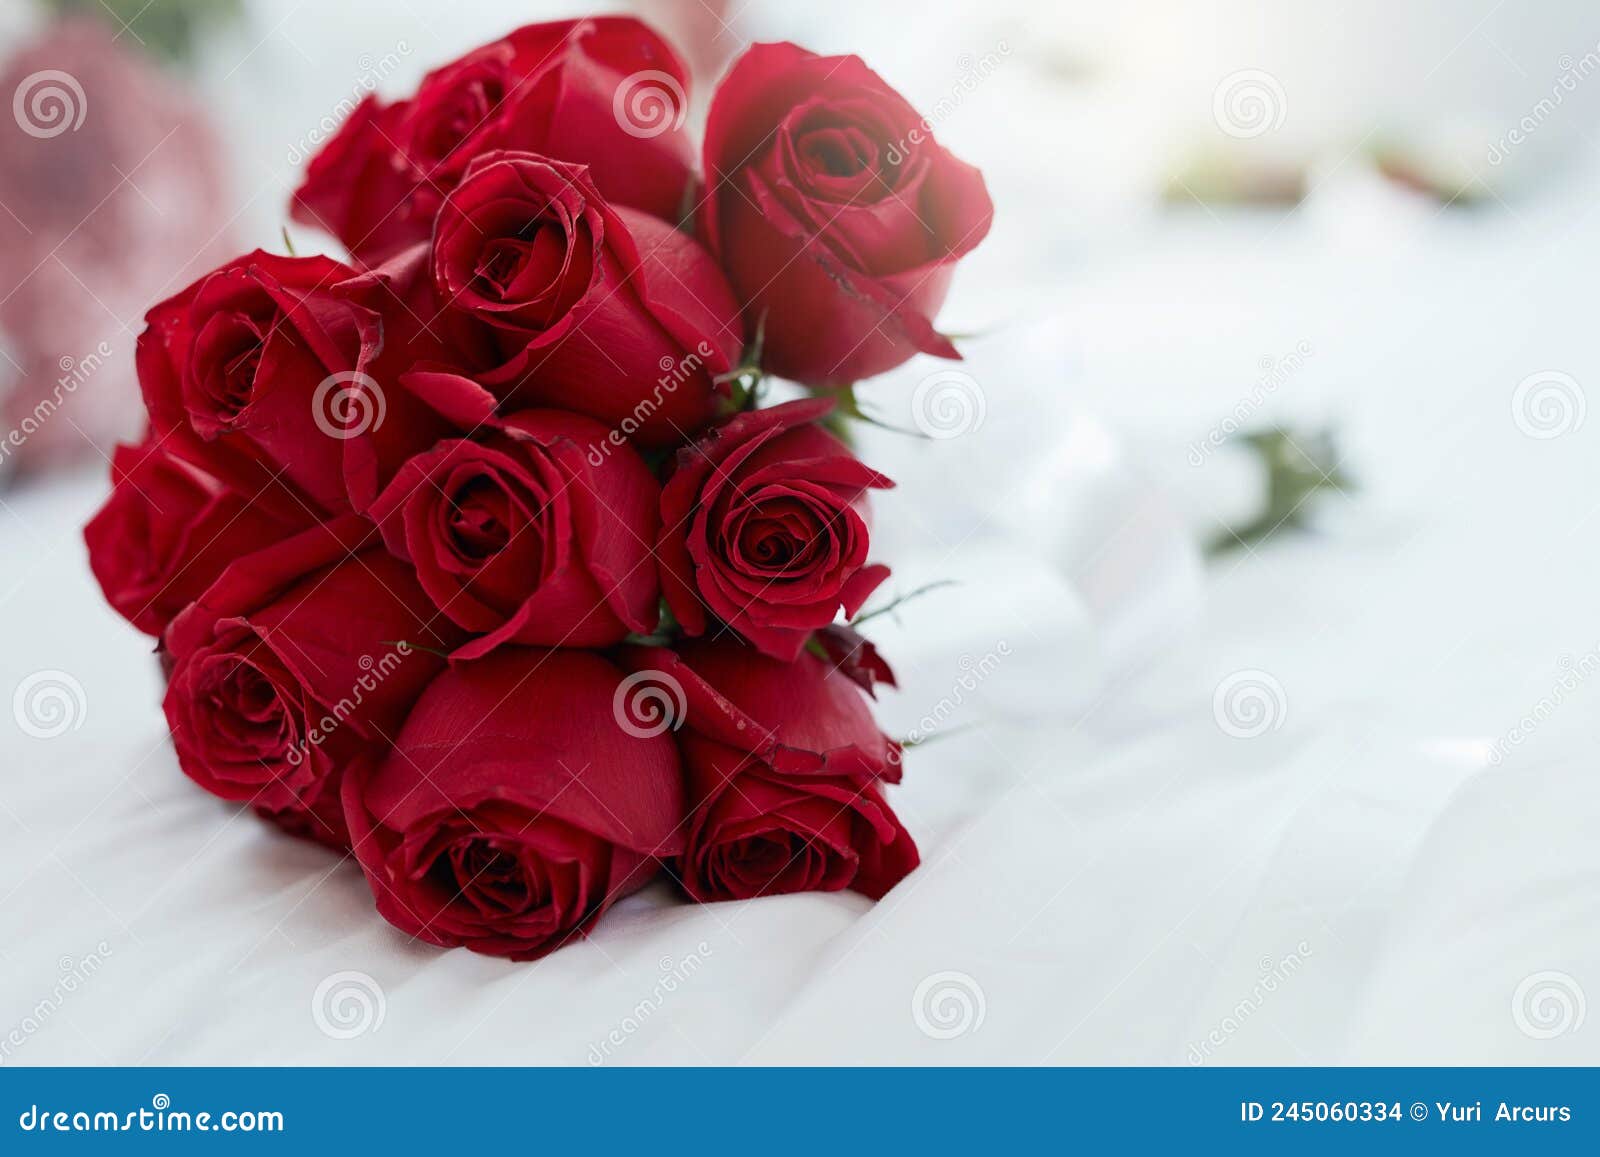 Roses are Red and Love is Forever. Shot of a Bunch of Red Roses Lying ...